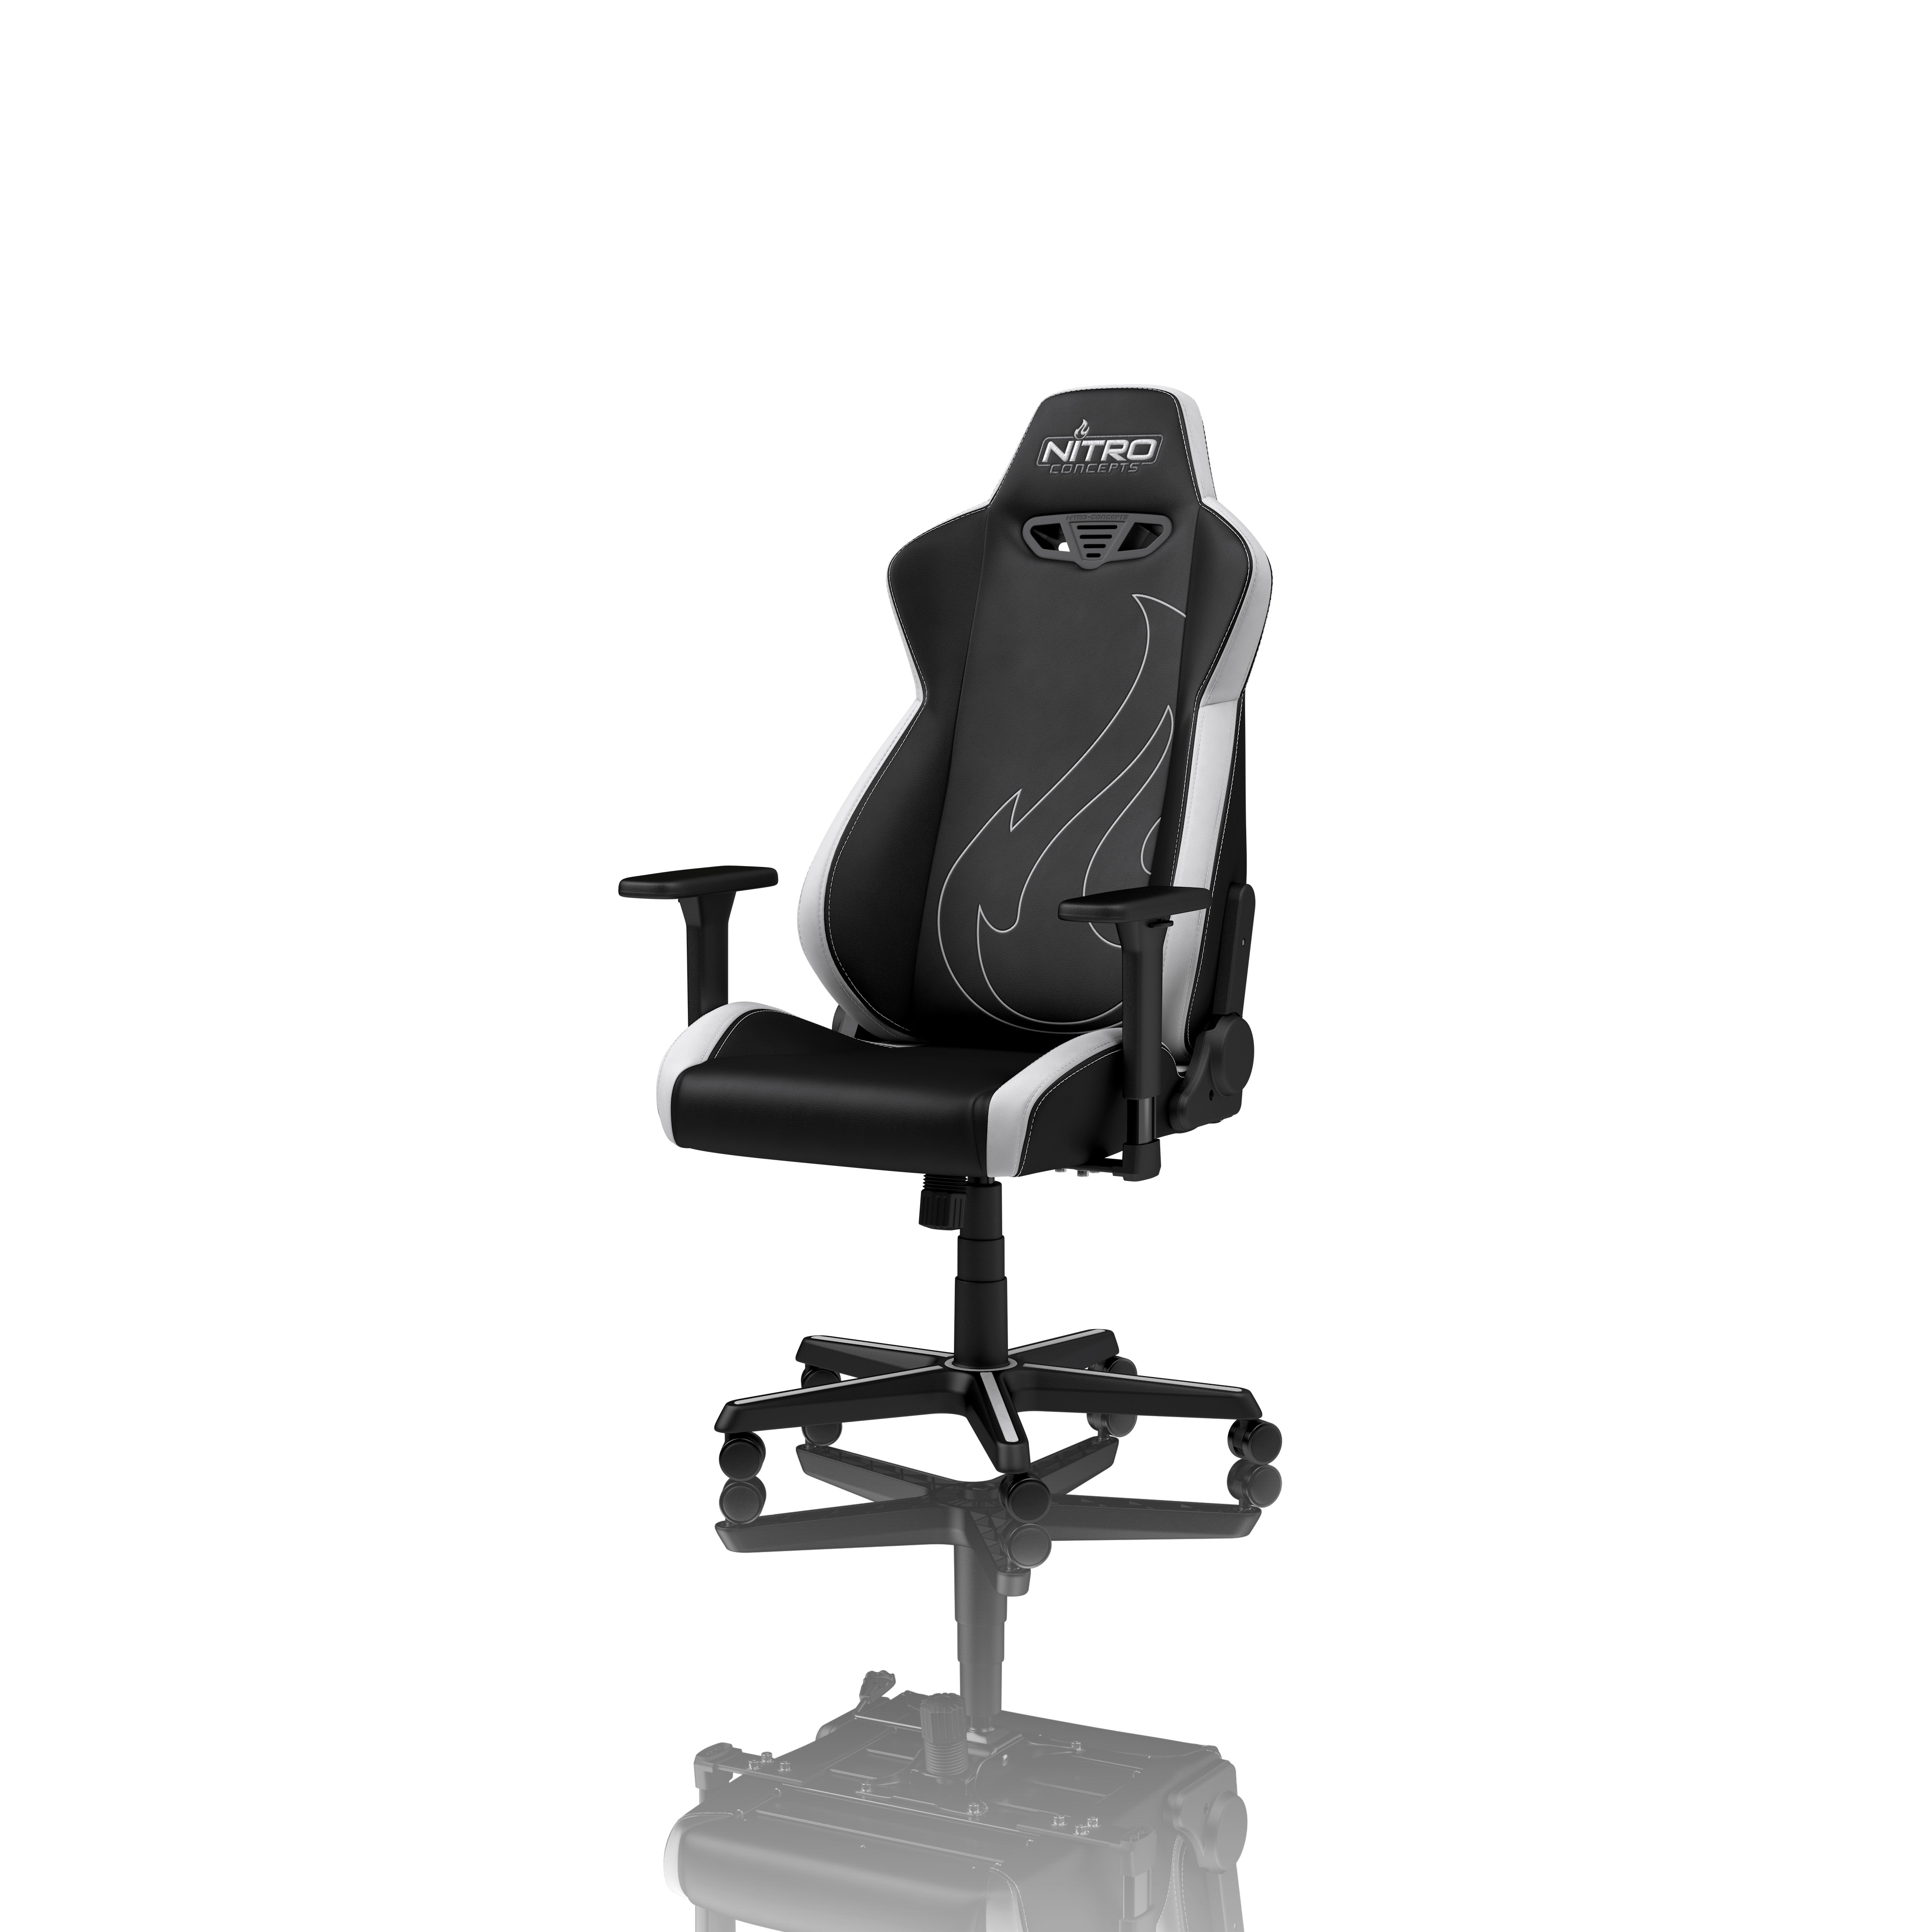 S300 EX Gaming Chair Radiant White